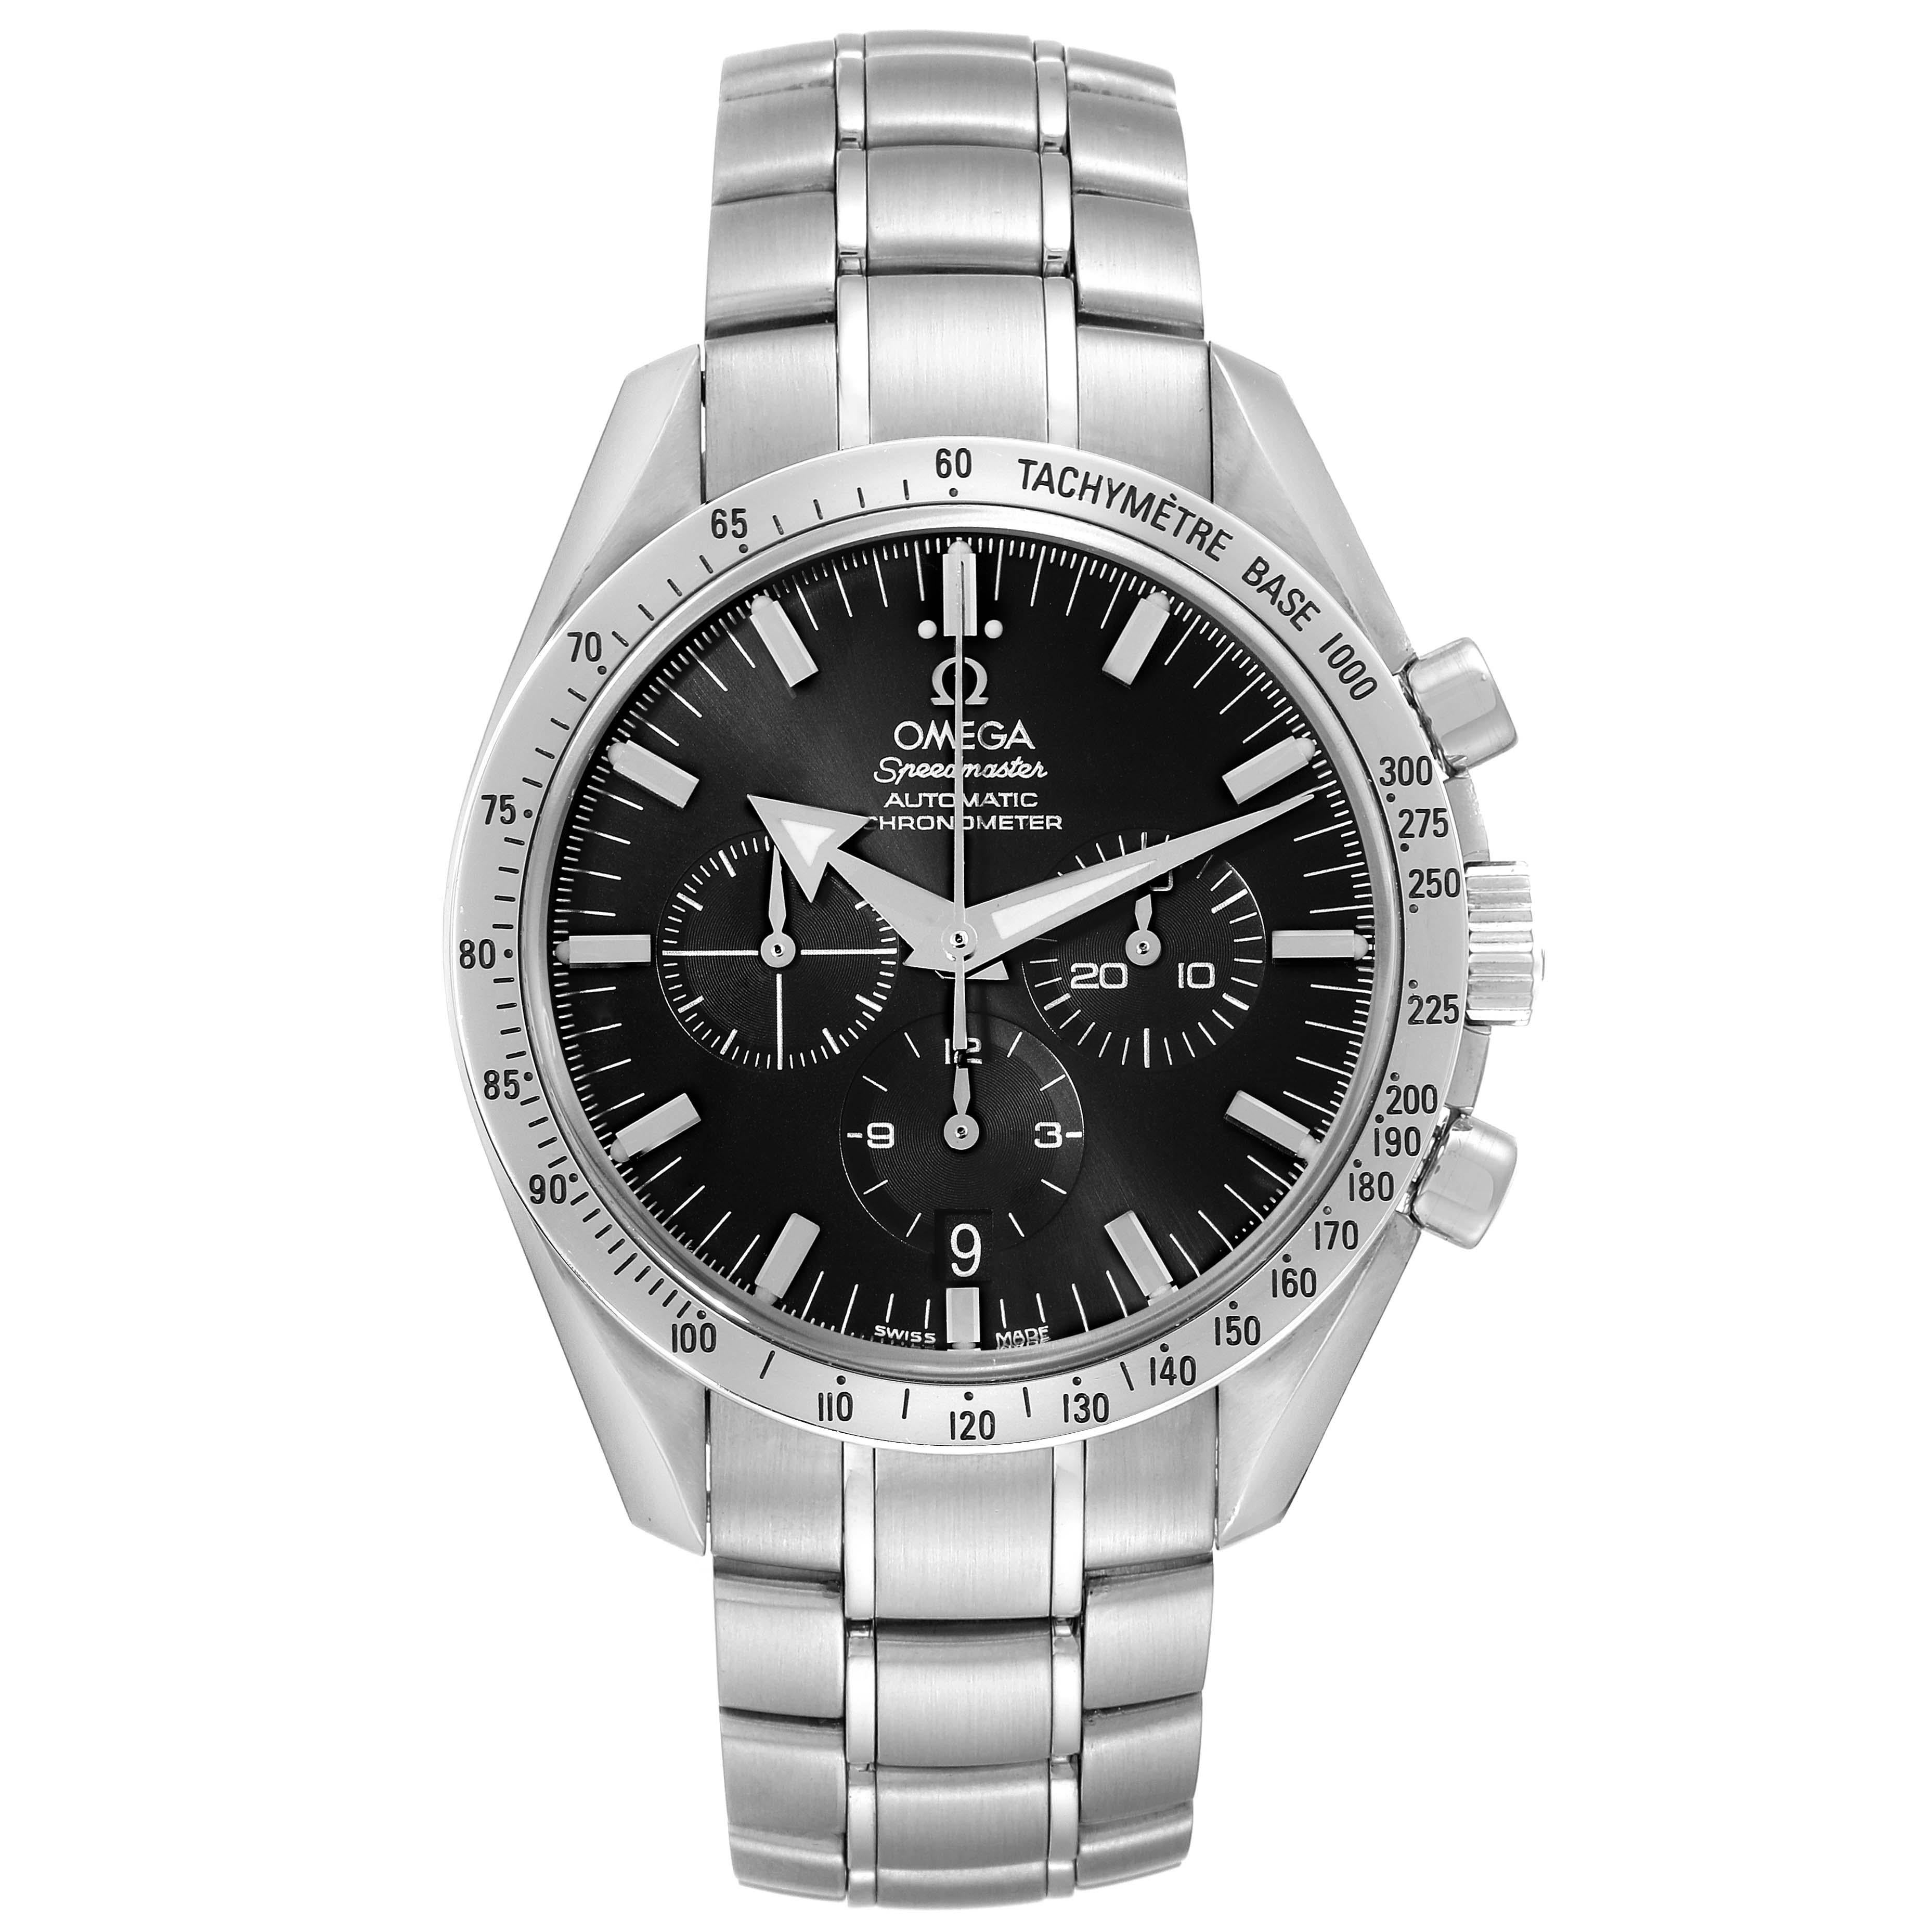 Omega Speedmaster Broad Arrow Chronograph Steel Mens Watch 3551.50.00. Officially certified chronometer automatic self-winding chronograph movement. Caliber 3303. Column wheel mechanism. Rhodium-plated finish. Geneva waves. Stainless steel round